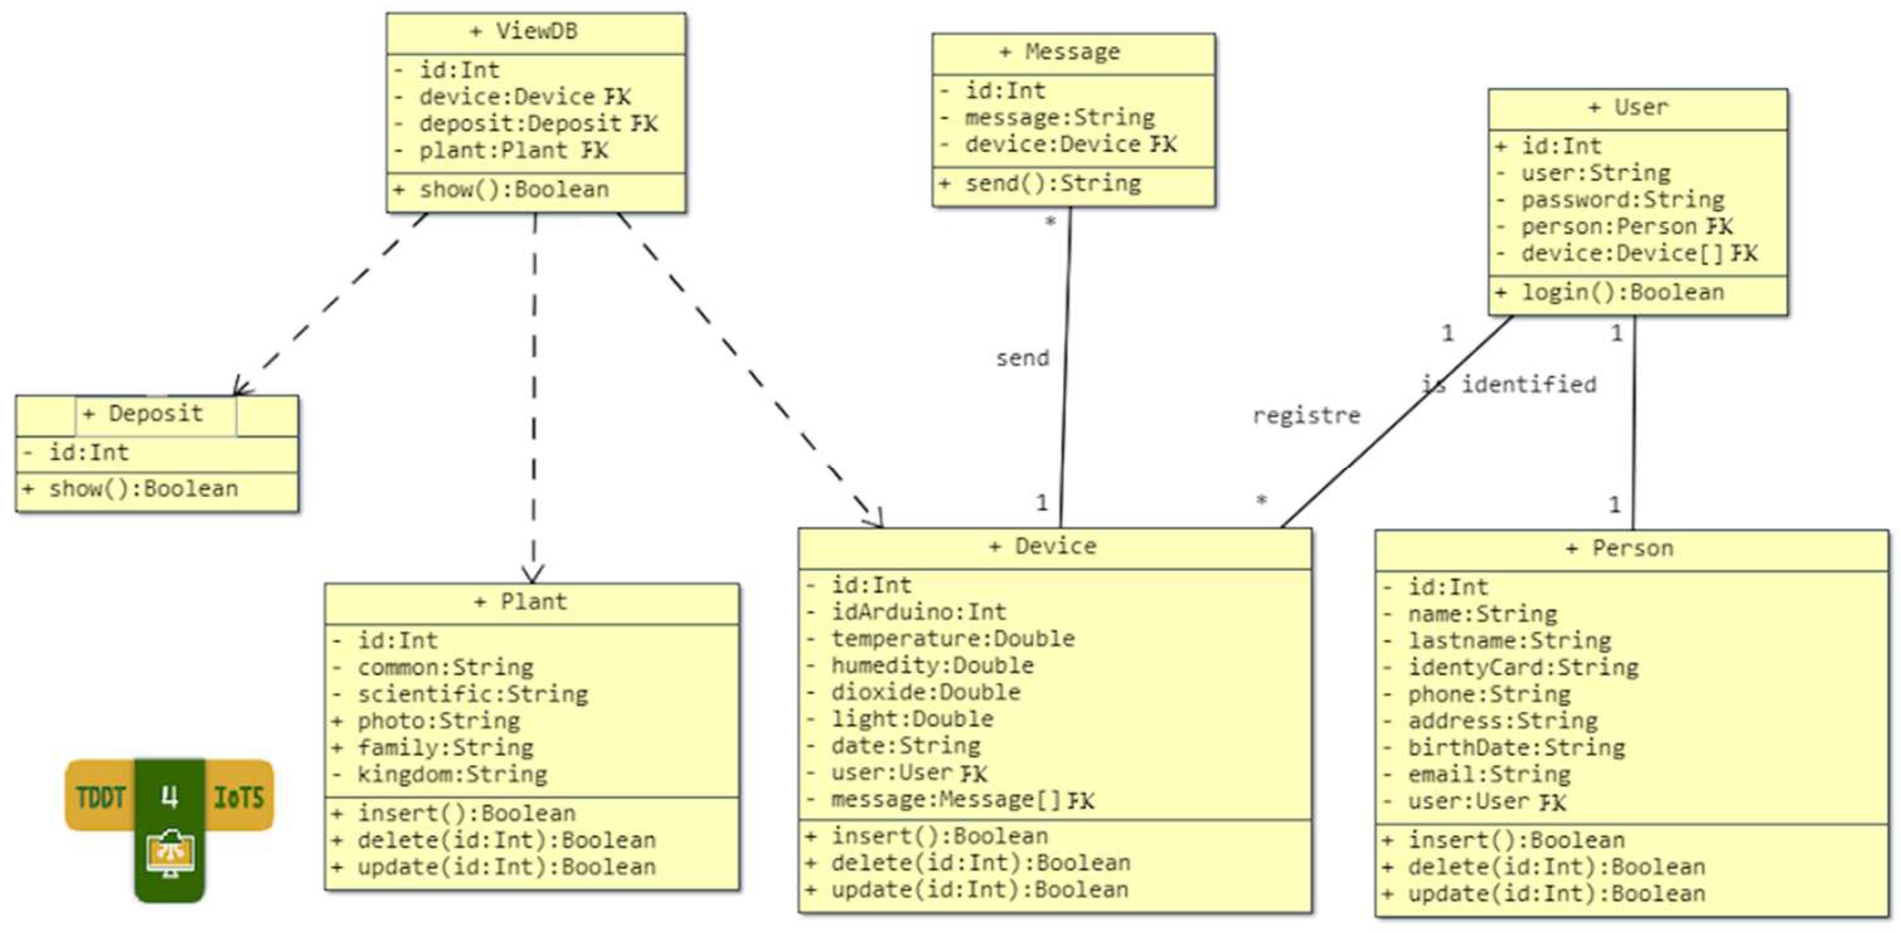 Class diagram (PIM) generated by TDDT4IoTS for P4L.